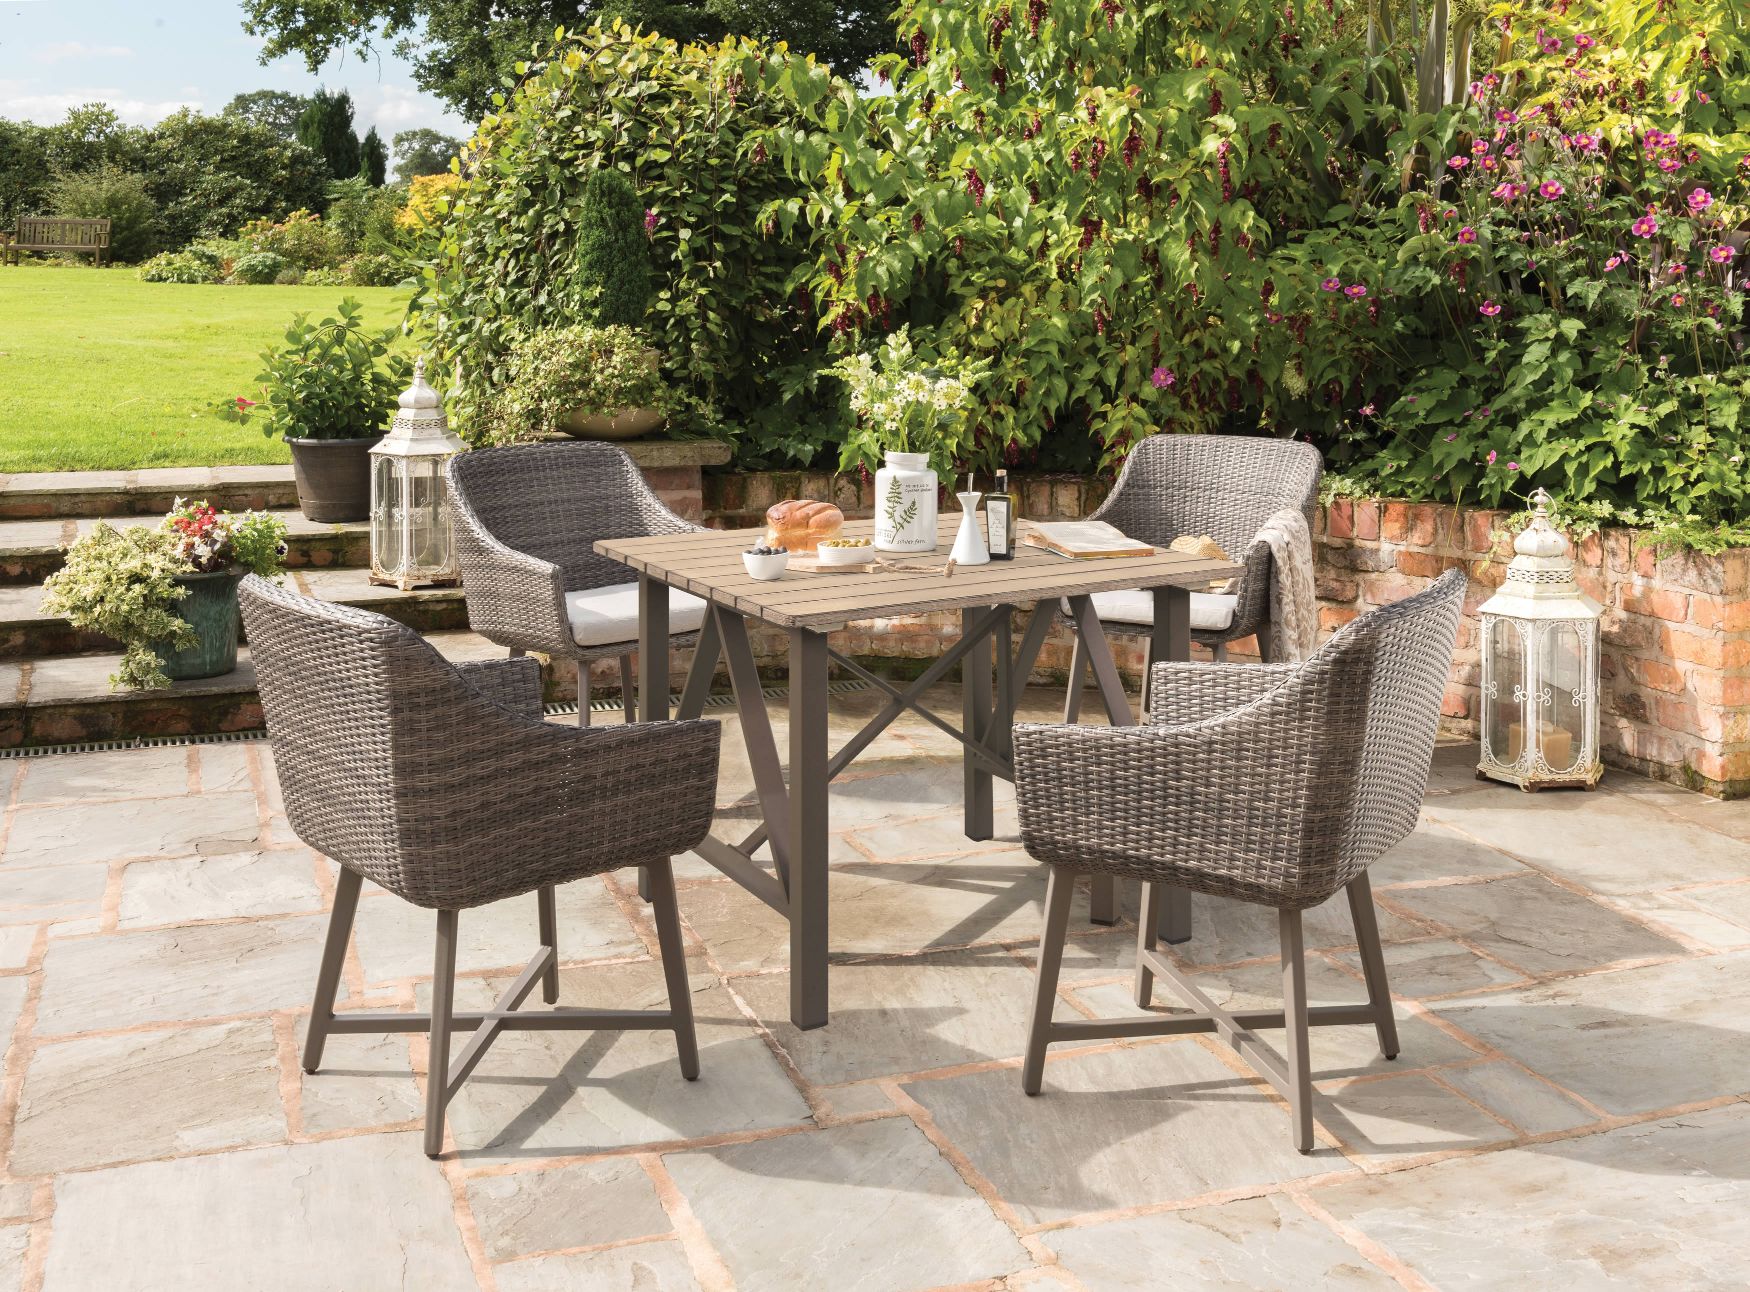 https://www.gardenfurniture.co.uk/wp-content/uploads/2022/11/0296821-3009-Lamode-dining-chair-and-0296825-3009-94x94cm-dining-table-lifestyle-2.jpg